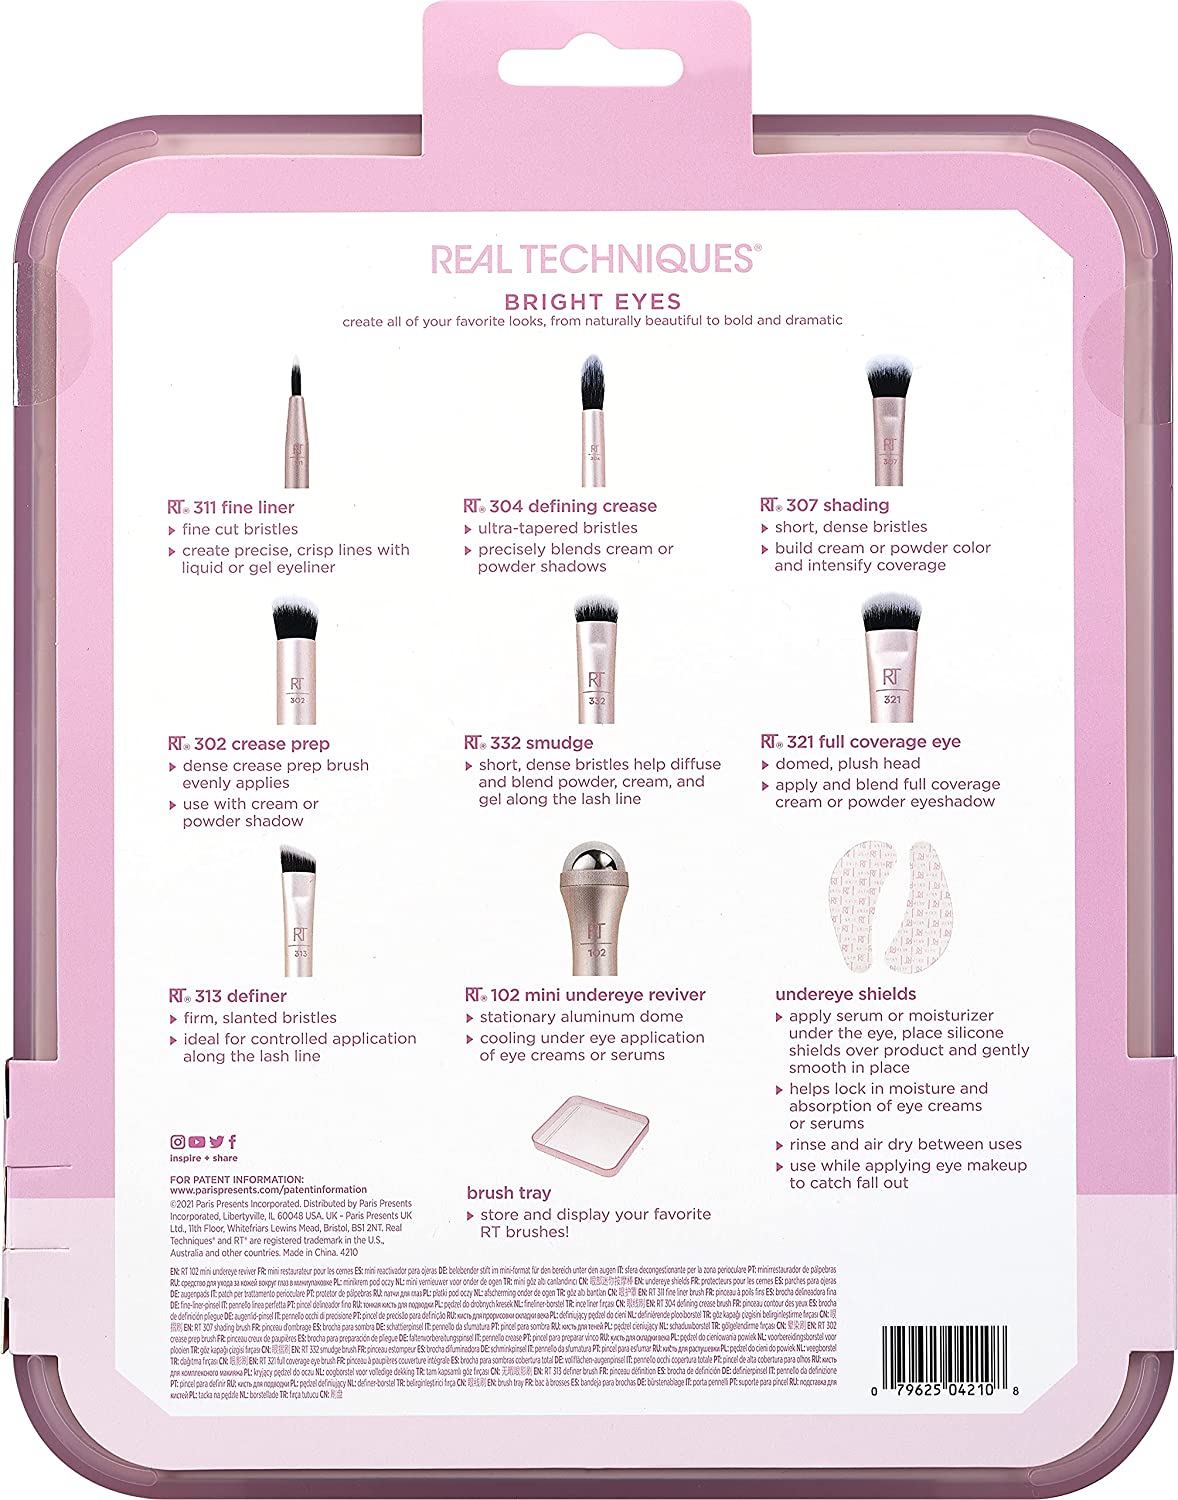 Real Techniques Bright Eyes Brush Set